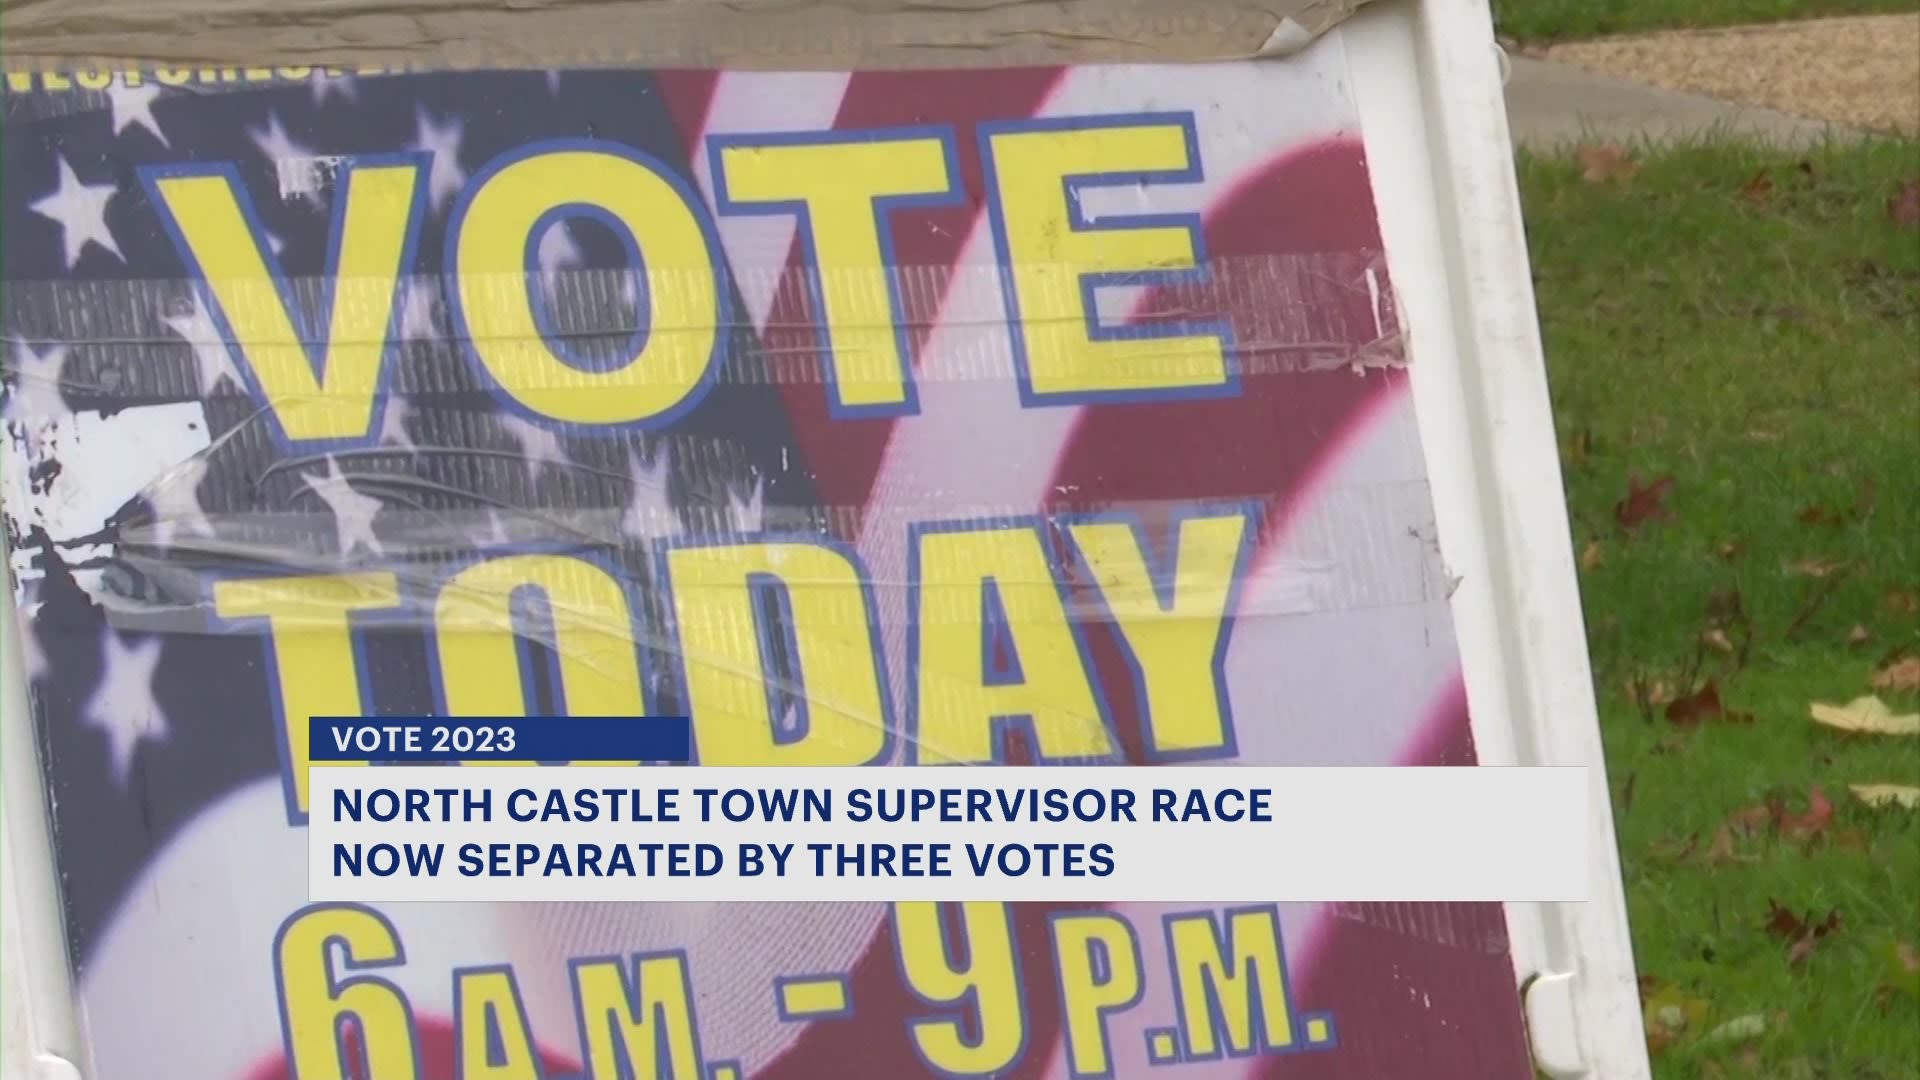 North Castle town supervisor race still too close to call